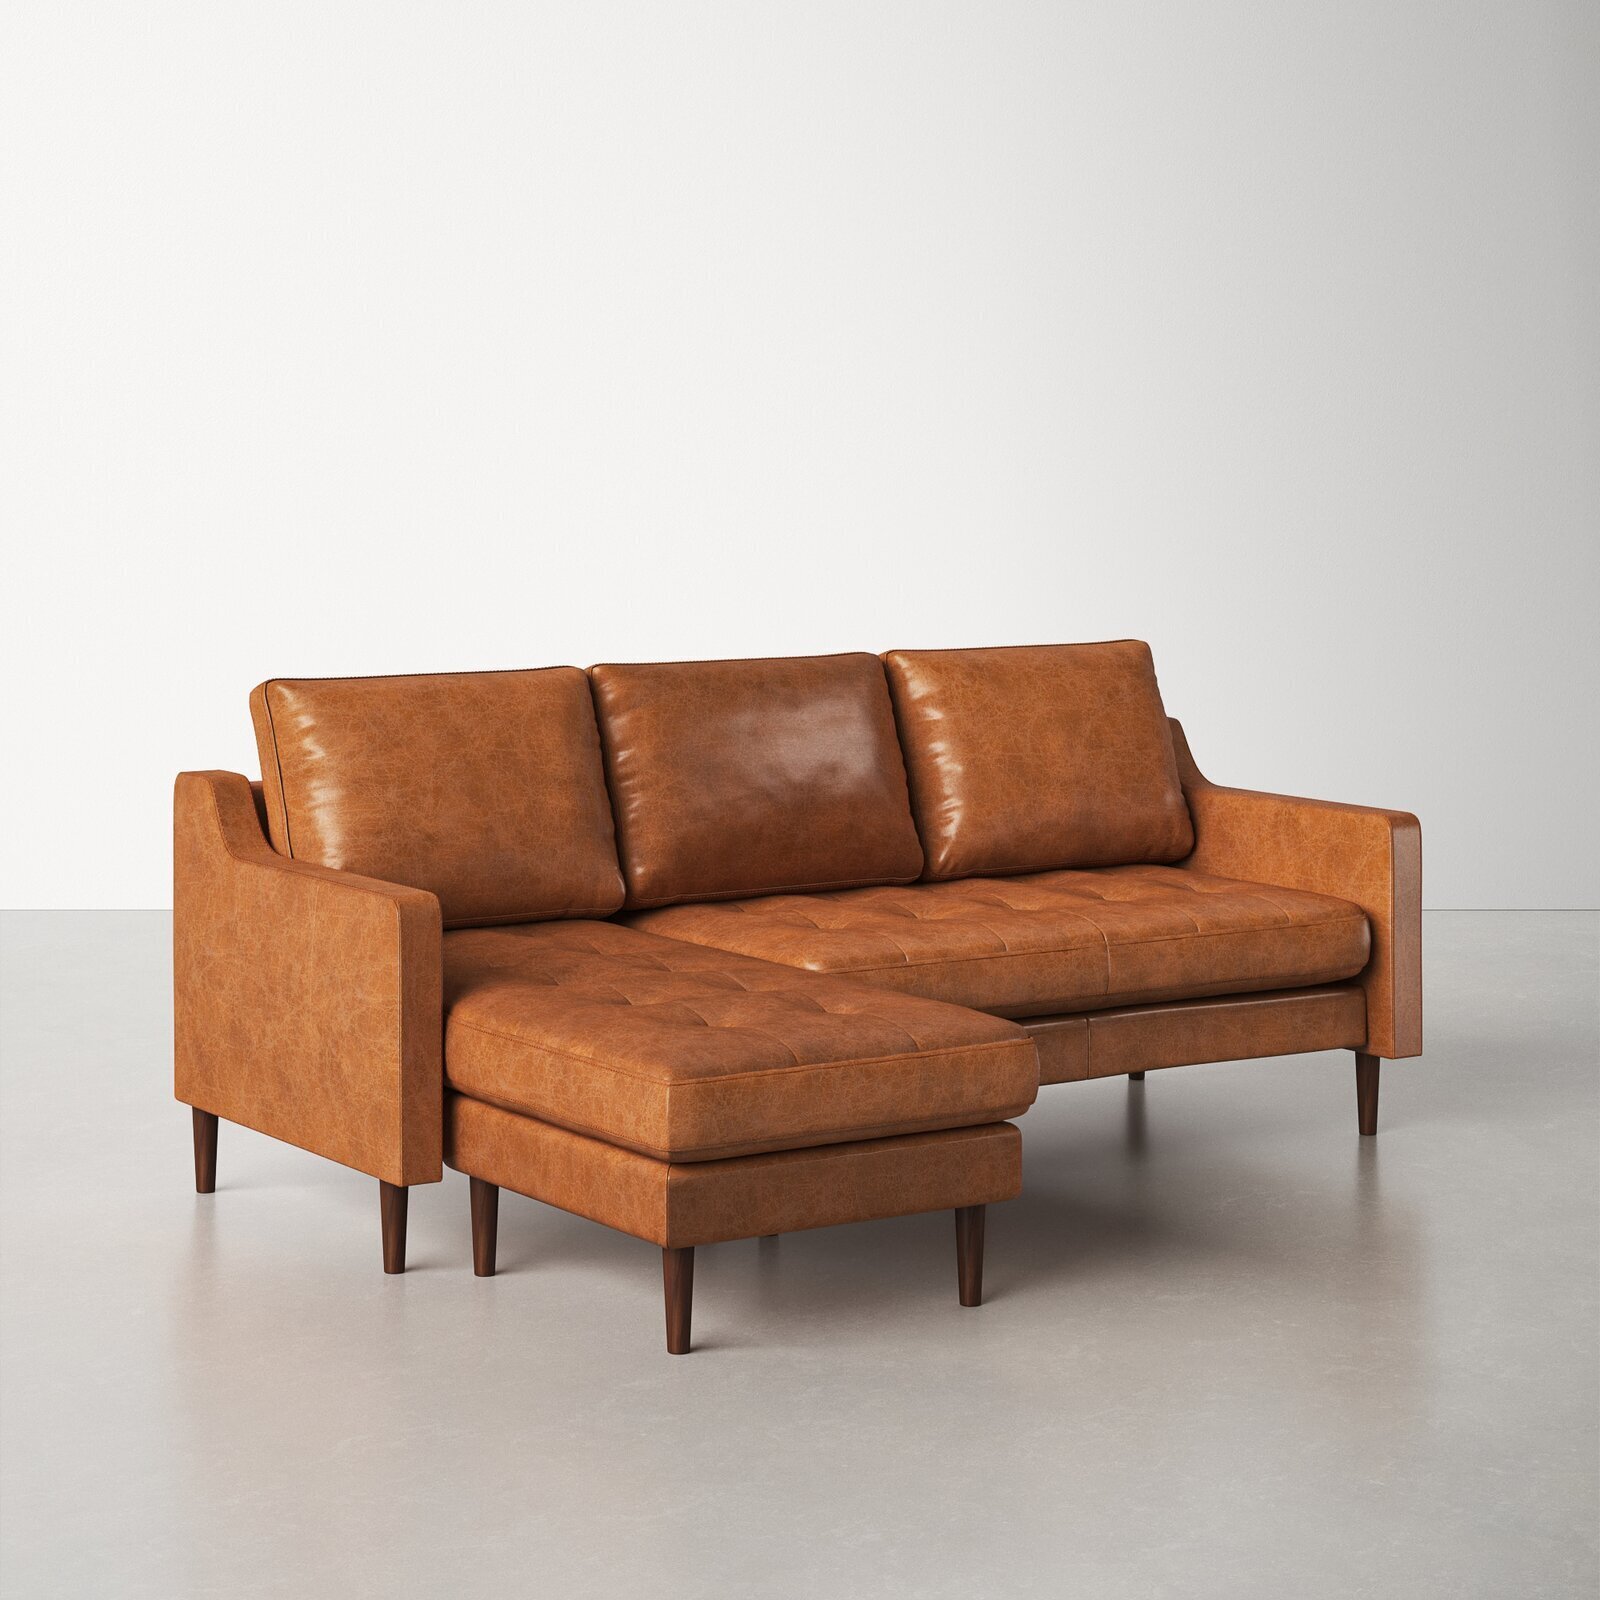 Two piece leather sectional